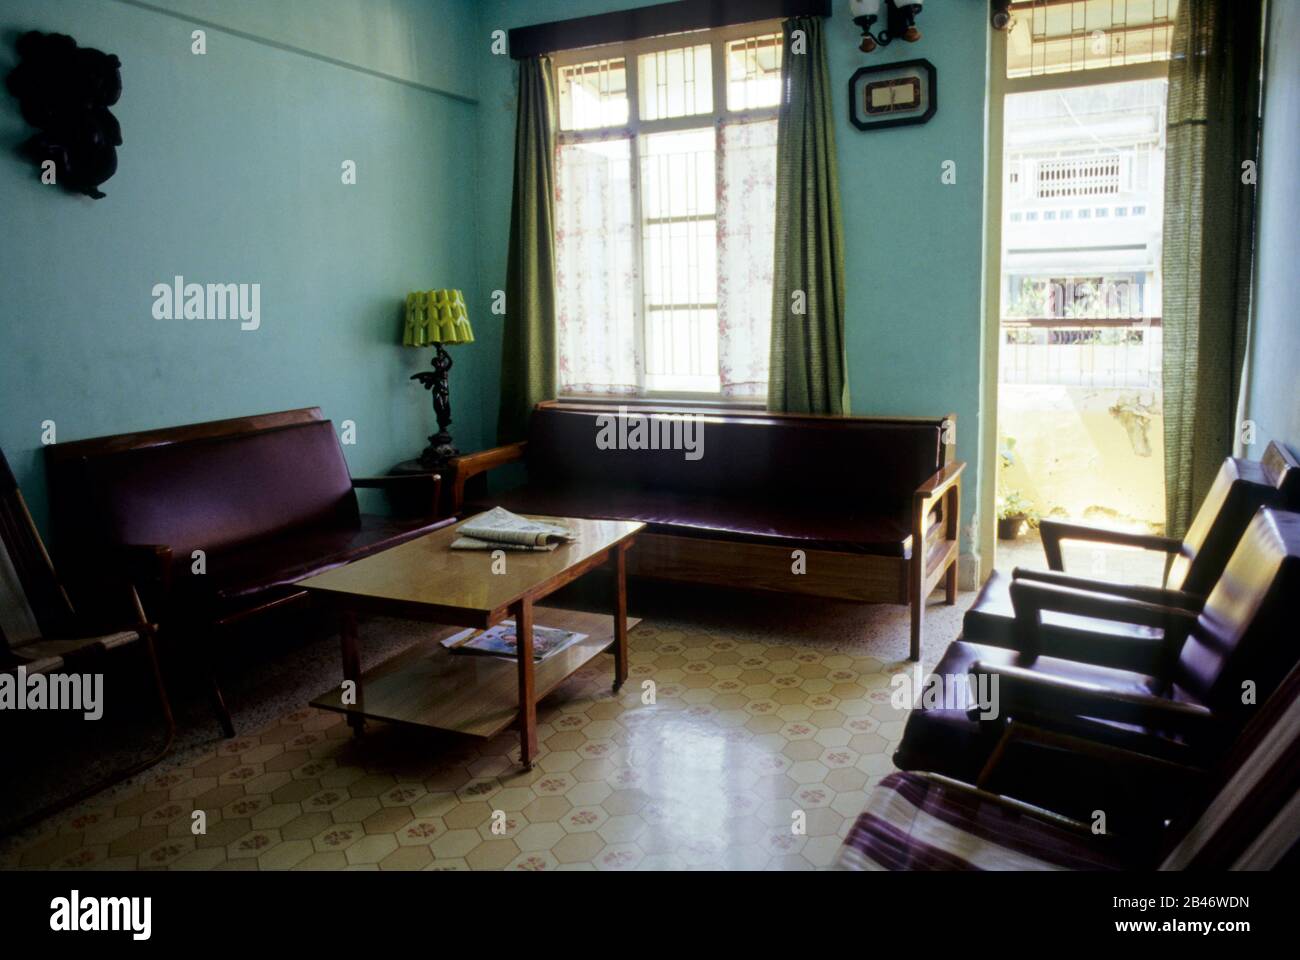 Interior of house hall ; living room ; sofa chairs table ; India ; Asia Stock Photo